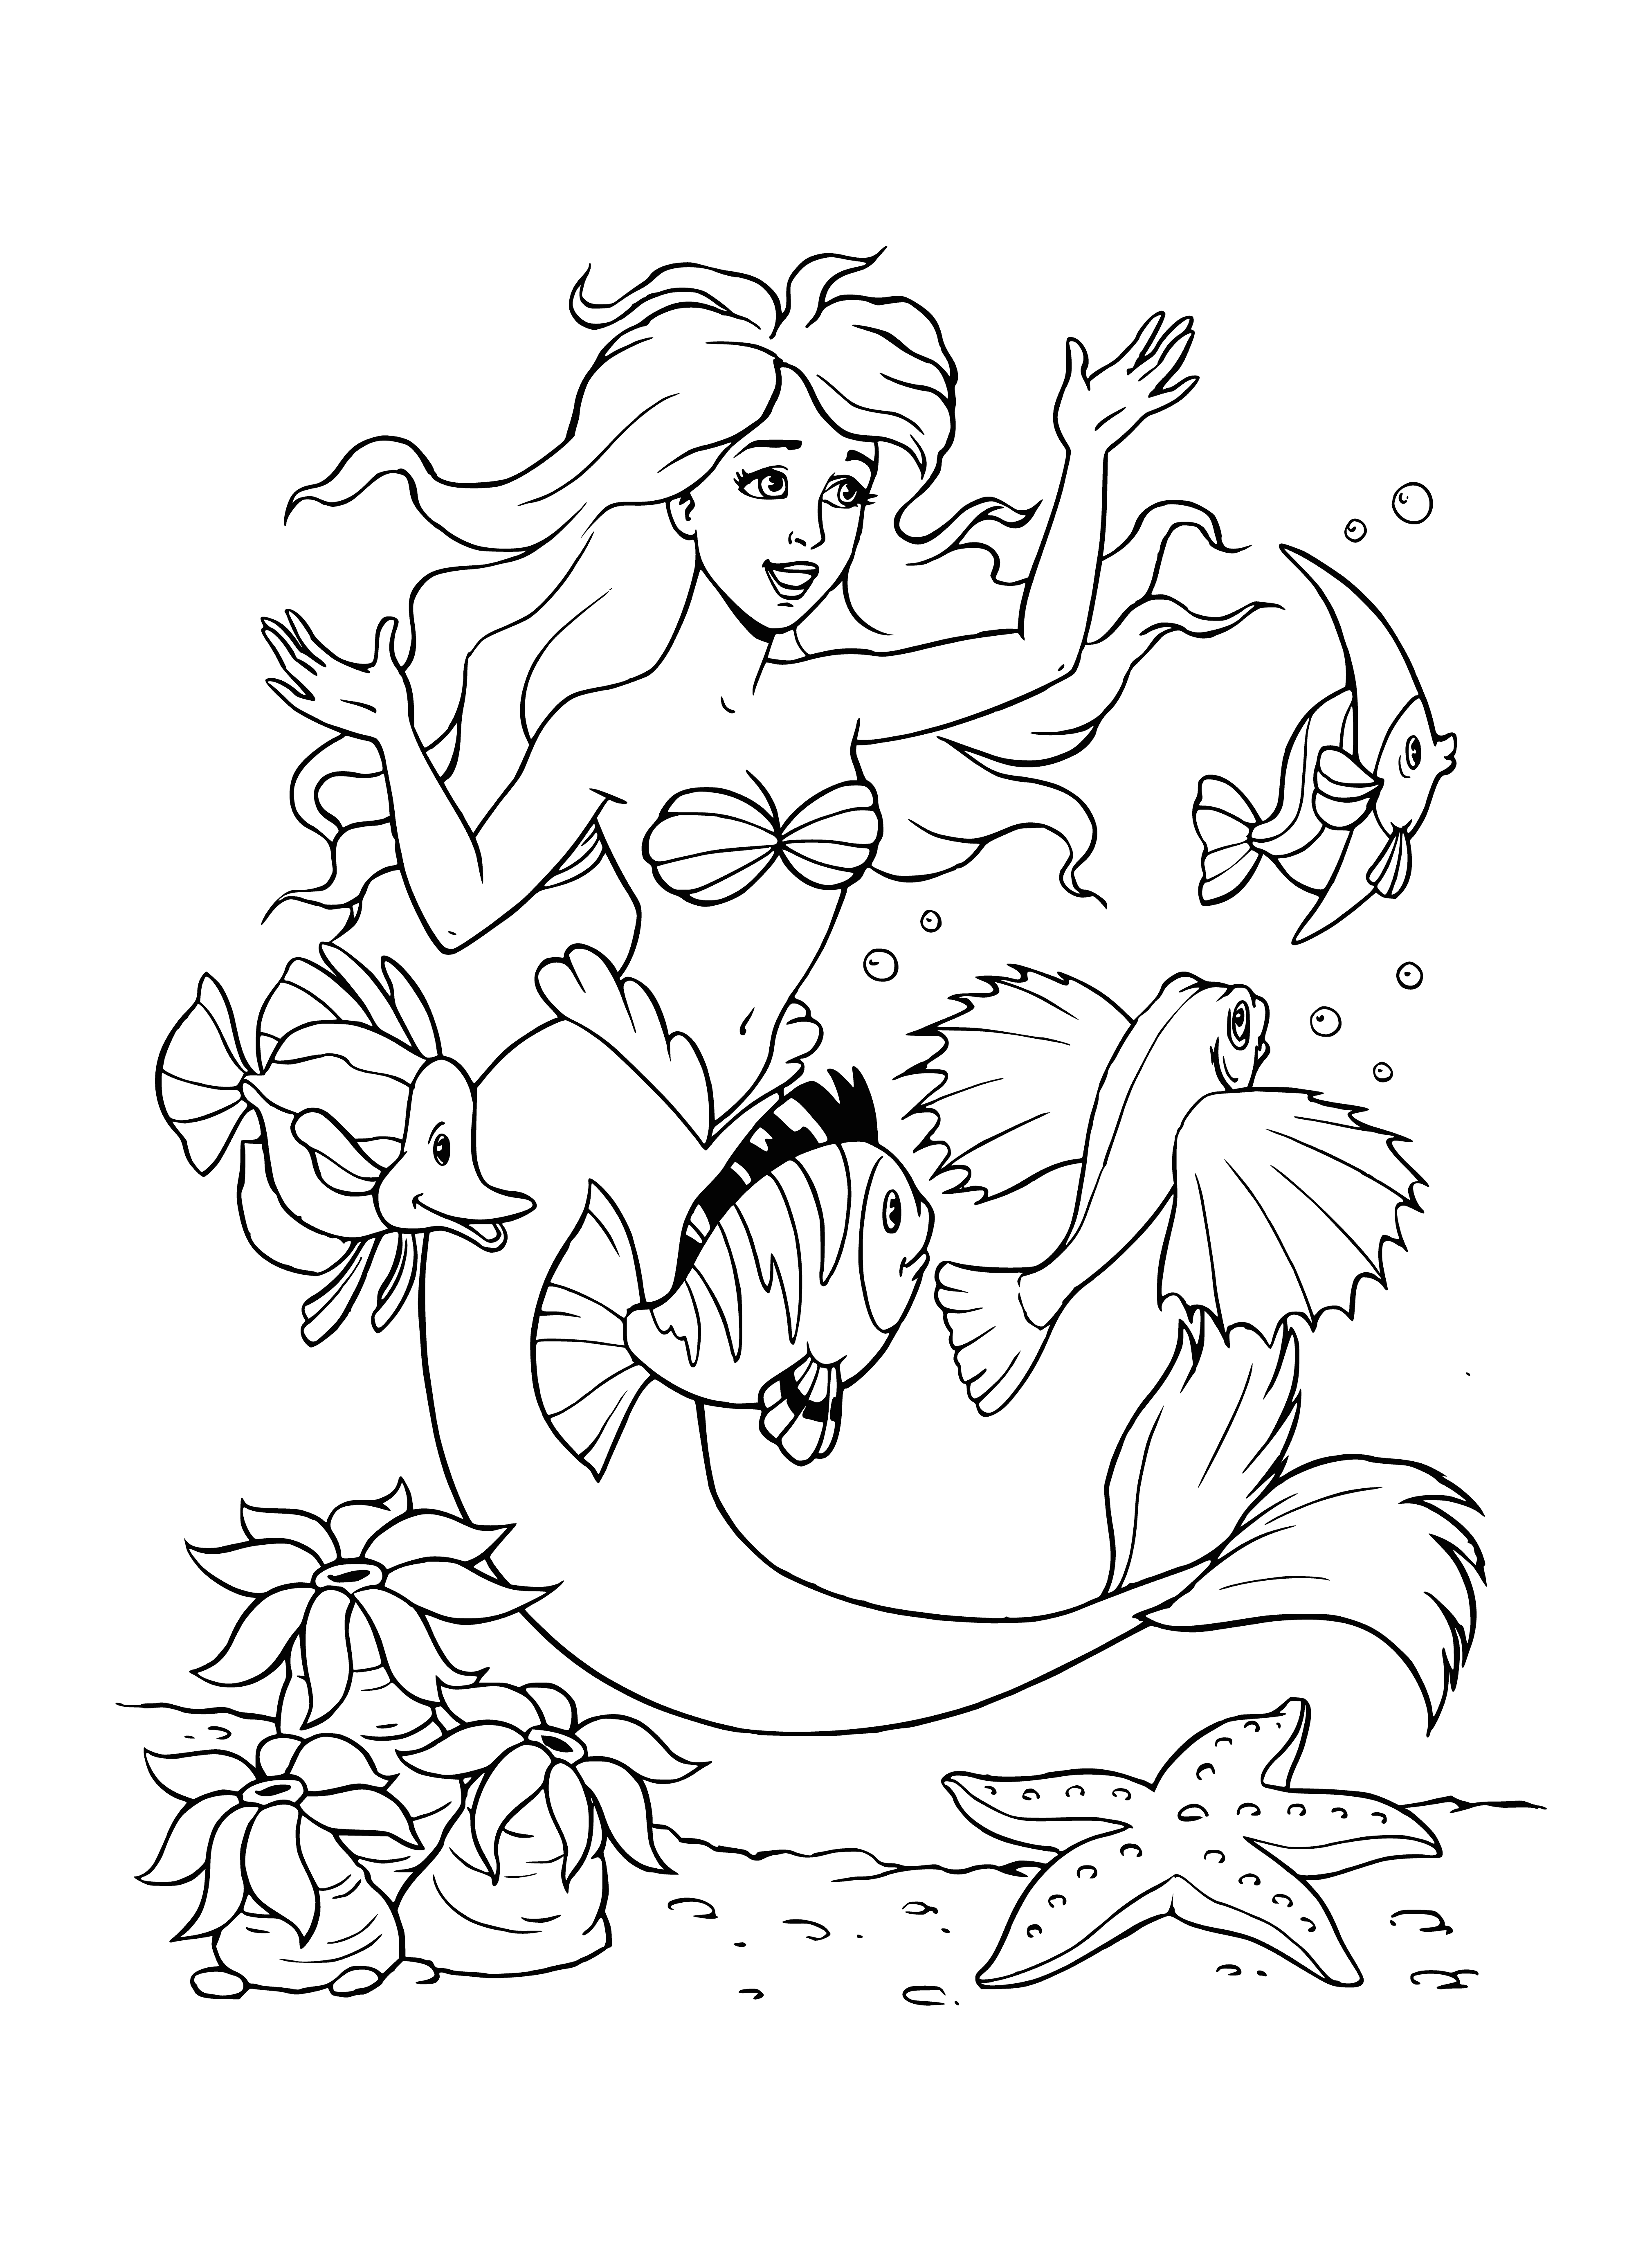 coloring page: A dark-haired woman stands on a dock looking at a large fish swimming with a large mouth and long body beneath the surface.